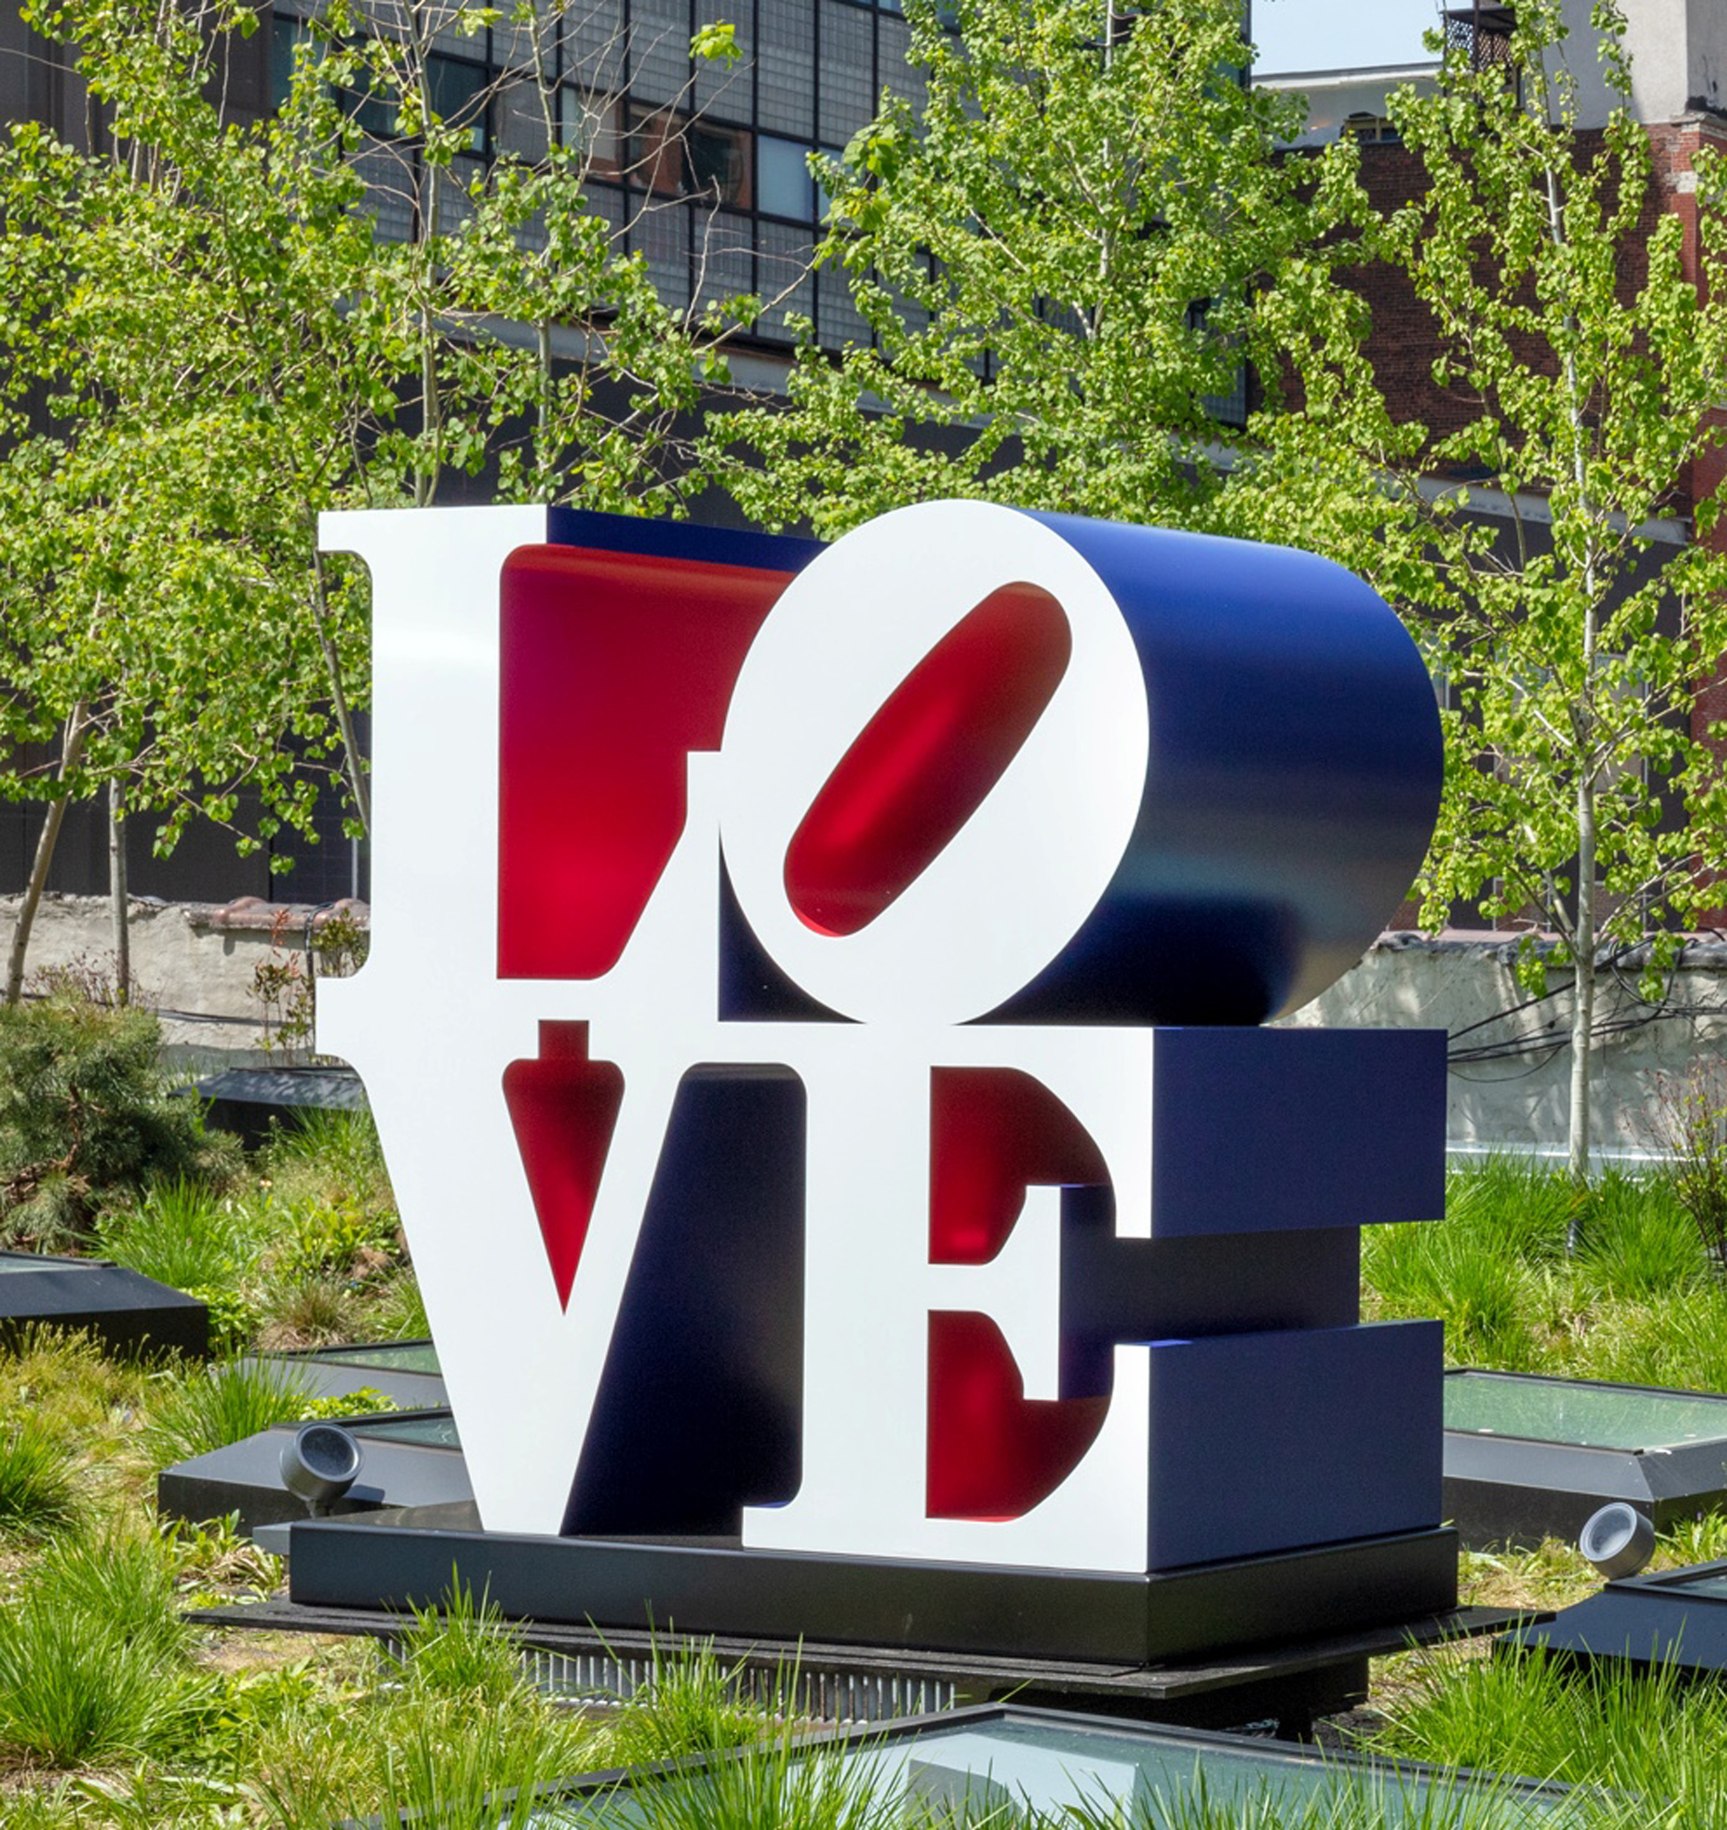 The American LOVE is a 72 by 72 by 36 inch polychrome aluminum sculpture spelling love, consisting the letters L and a tilted letter O on top of the letters V and E. The faces of the letters are the color white, the sides are blue, and the insides are red.